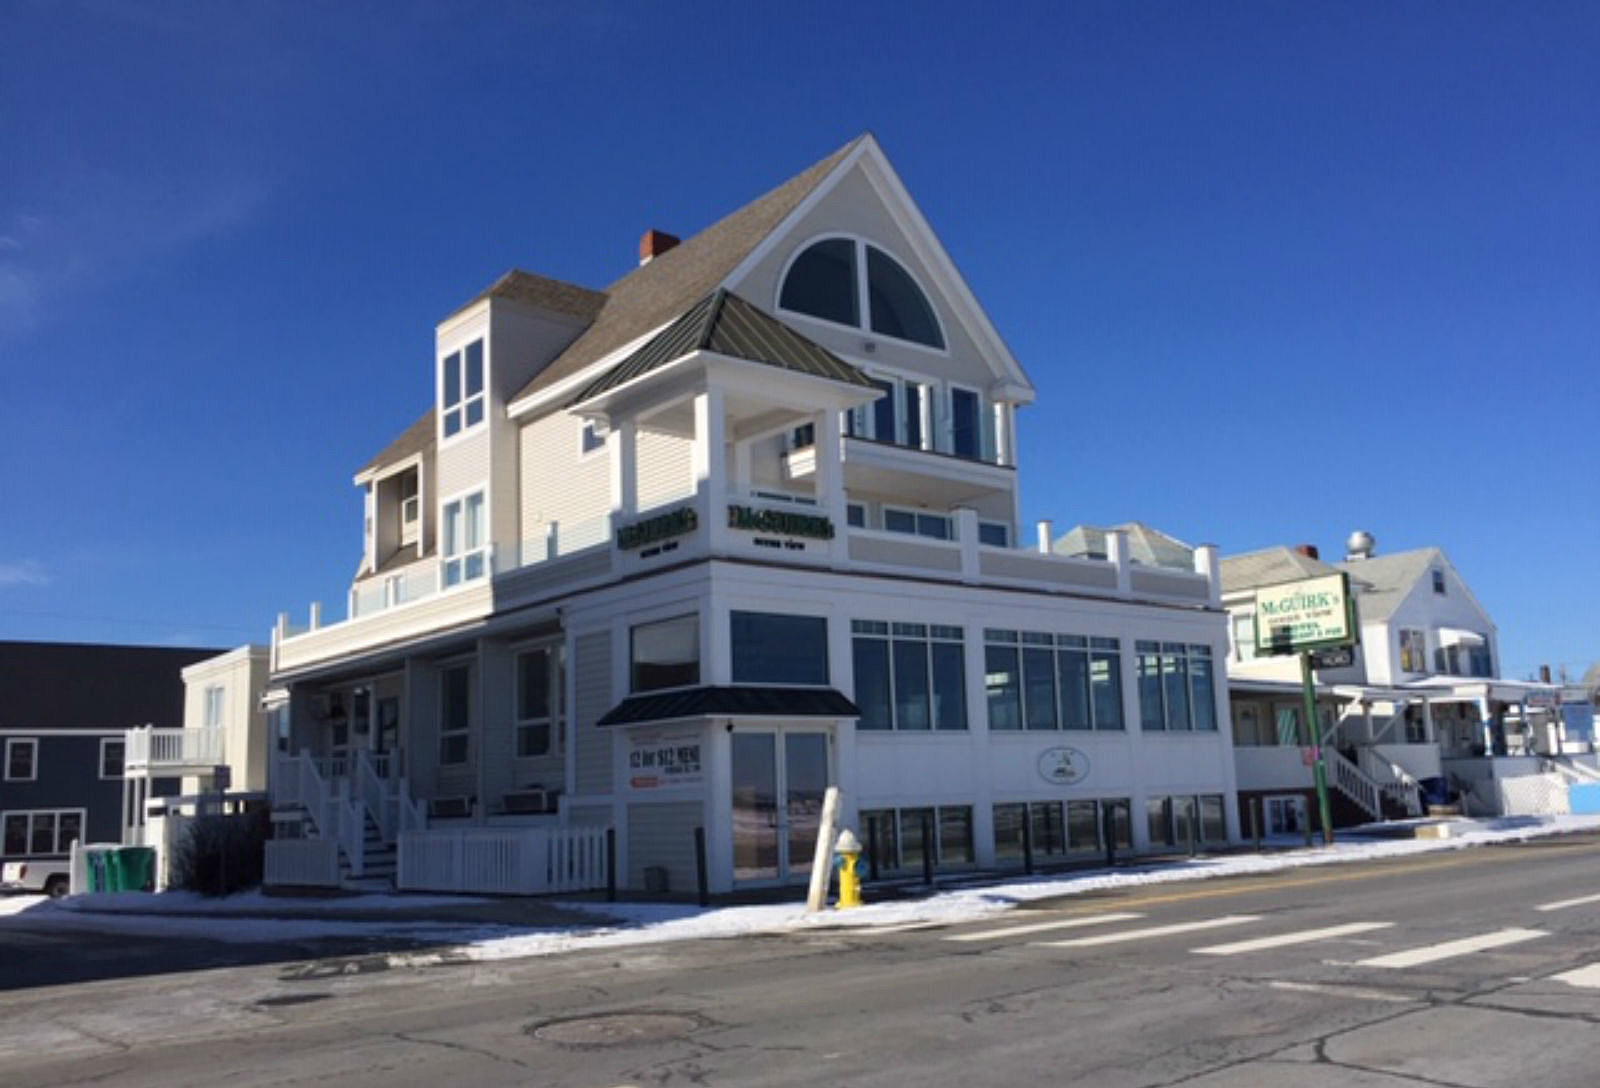 Plans in Place for Cruise Ship Style Restaurant at Hampton Beach